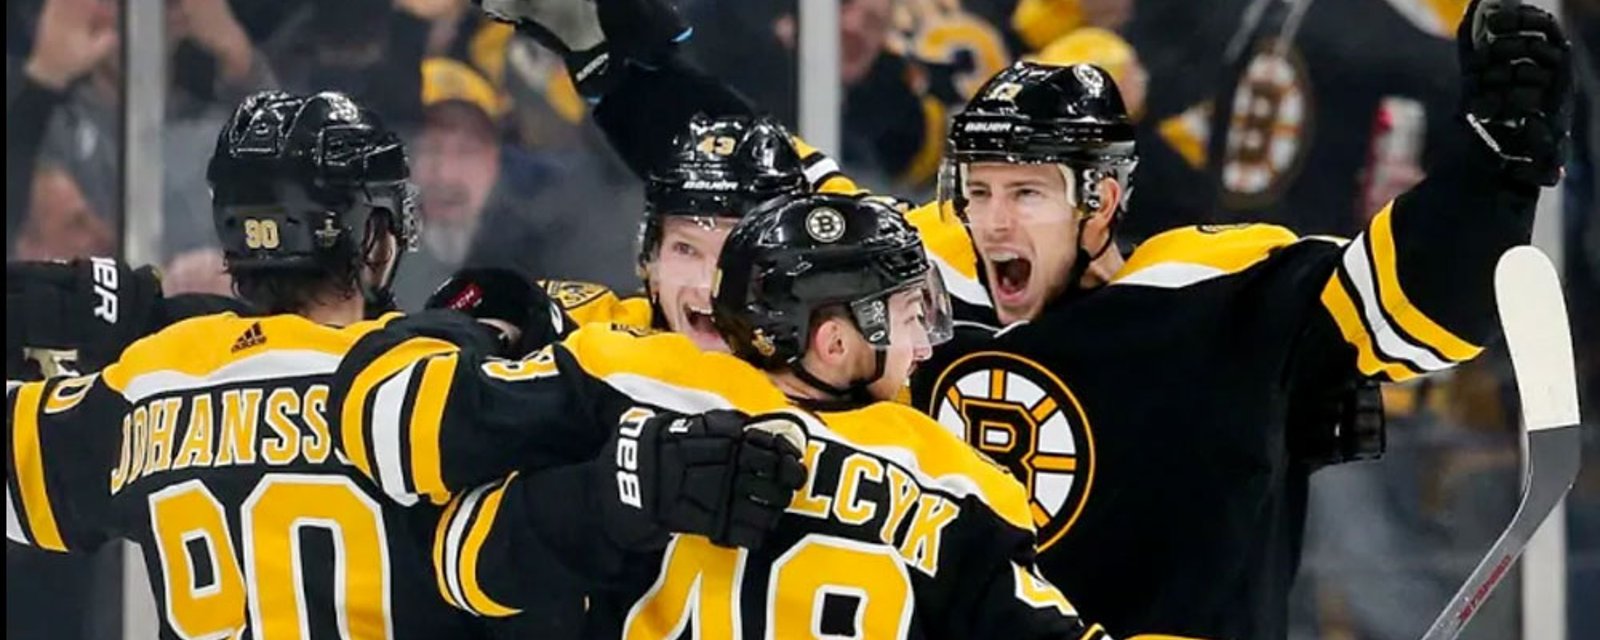 Cam Neely hints at a big change to Bruins’ lineup for upcoming season